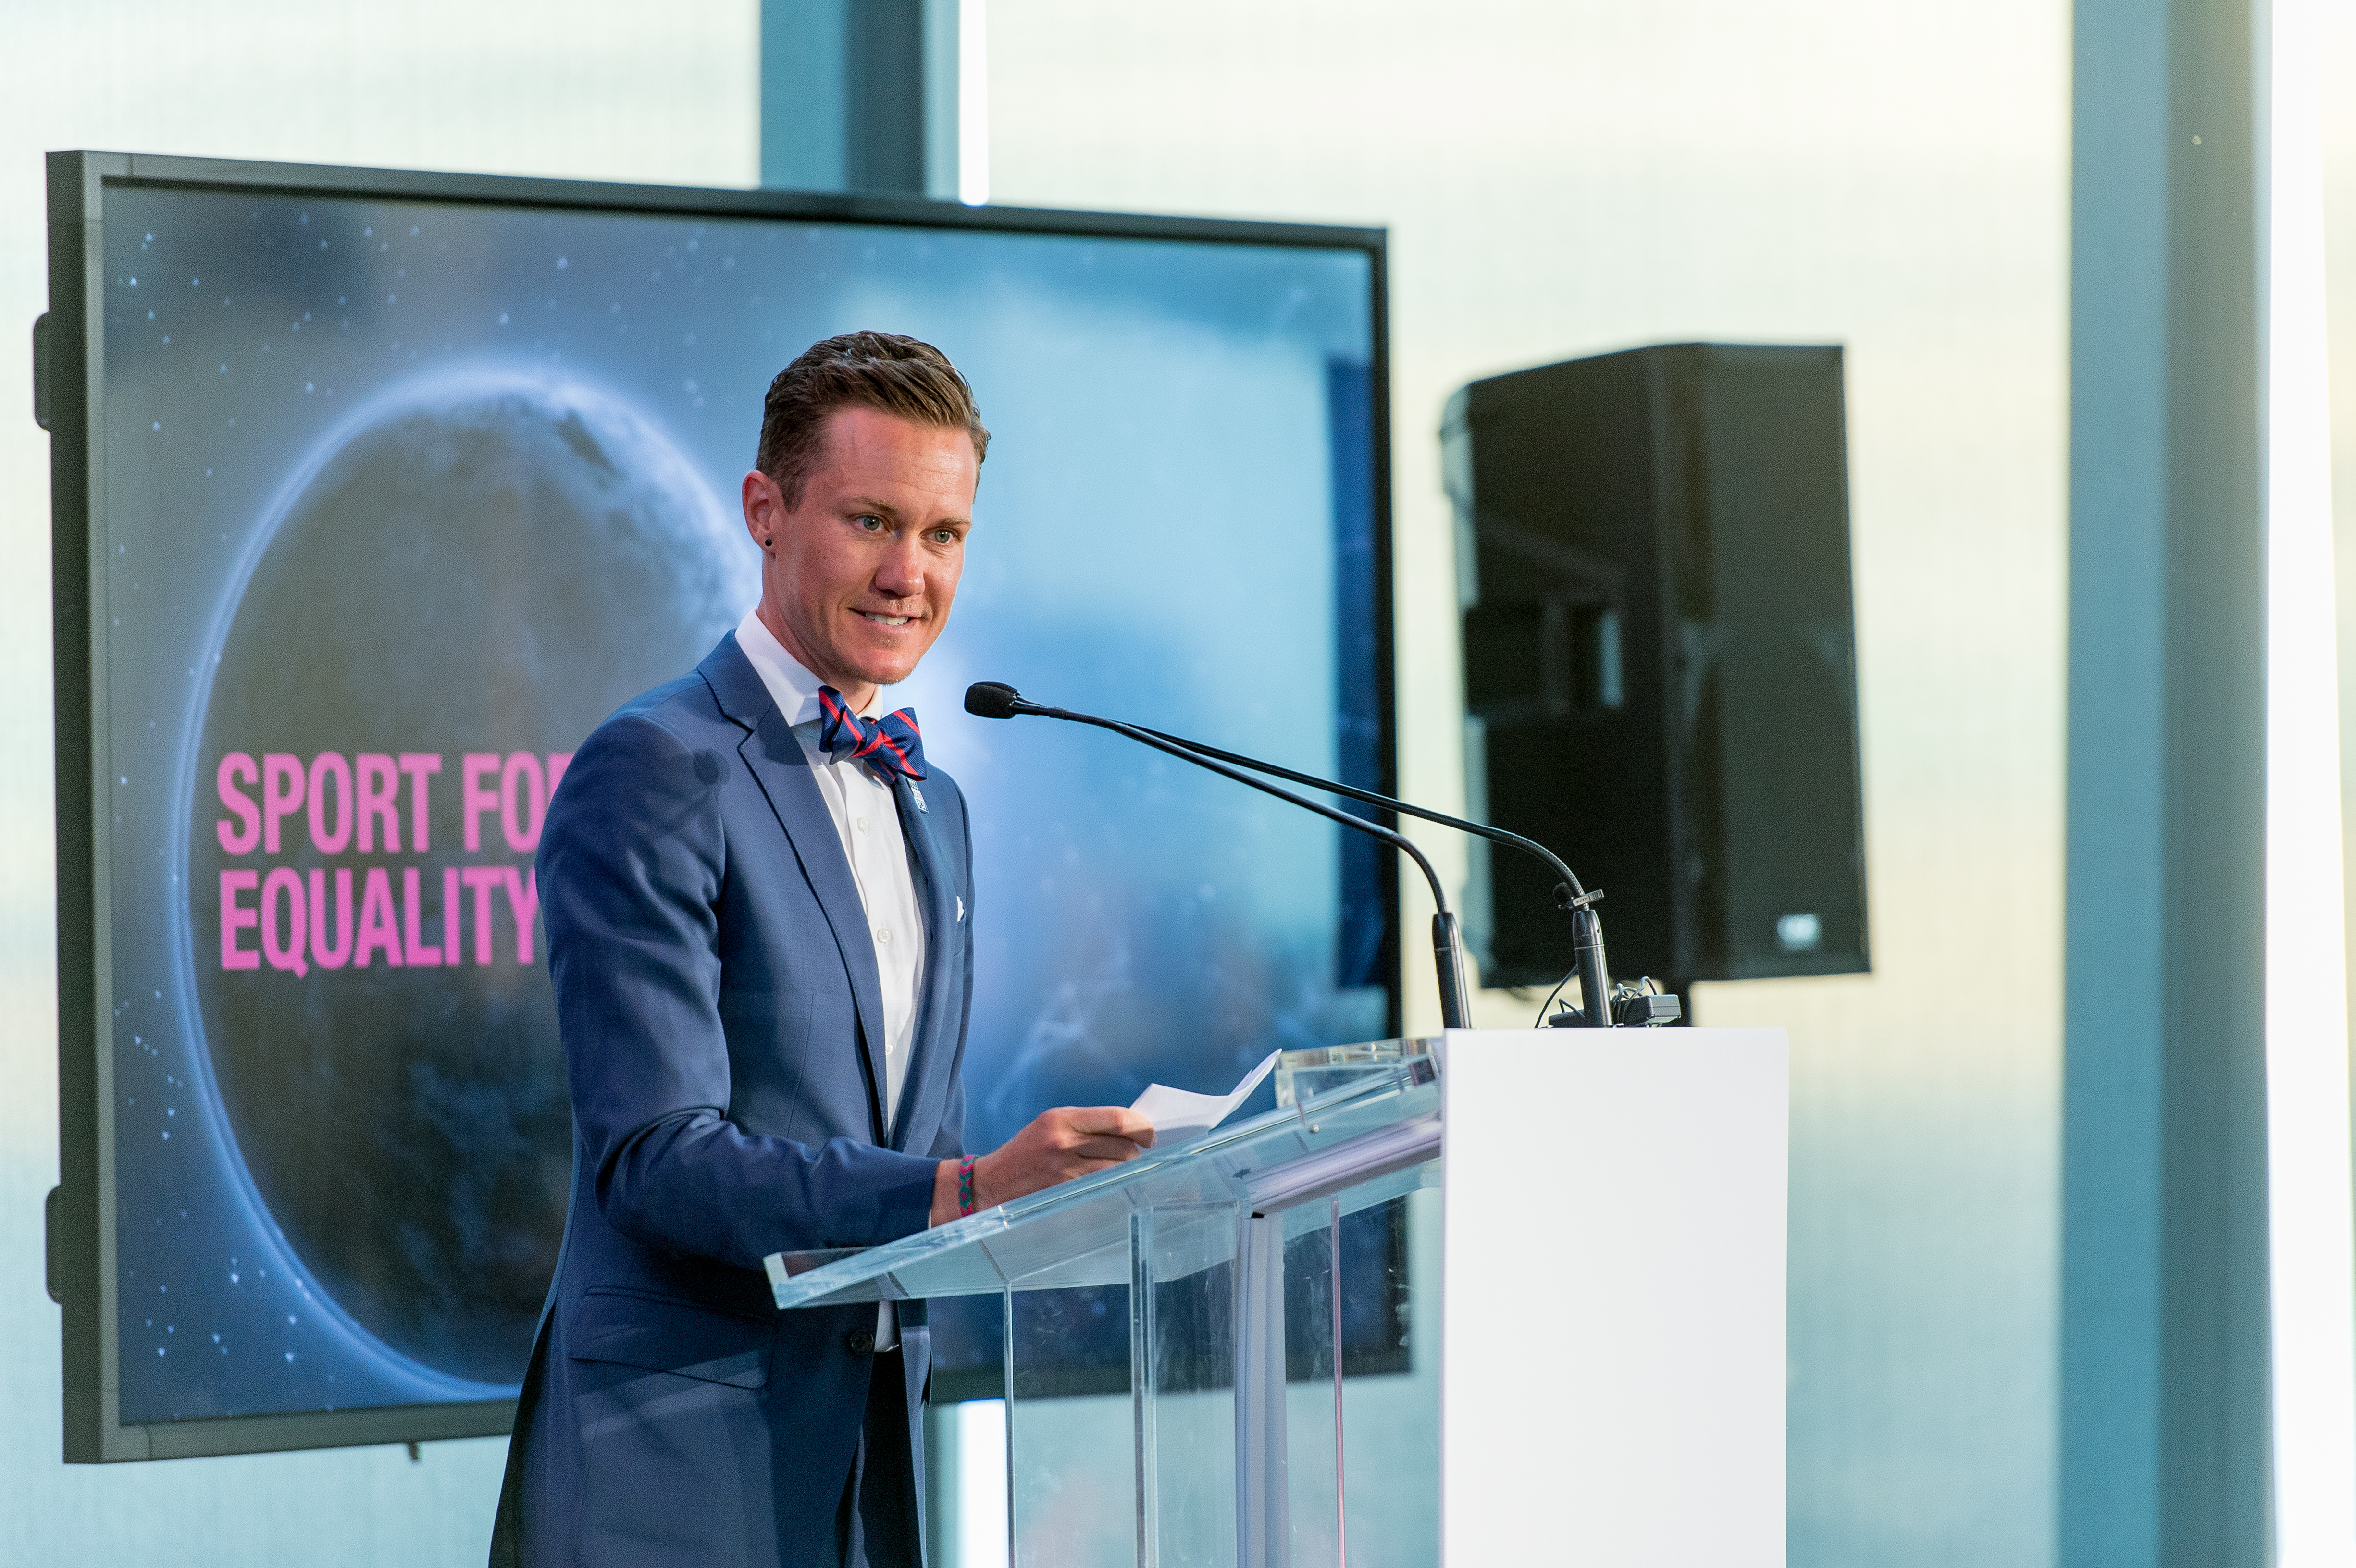 Chris Mosier presents the Sport for Equality Award during the Beyond Sport Global Awards on July 26, 2017 in New York City. 